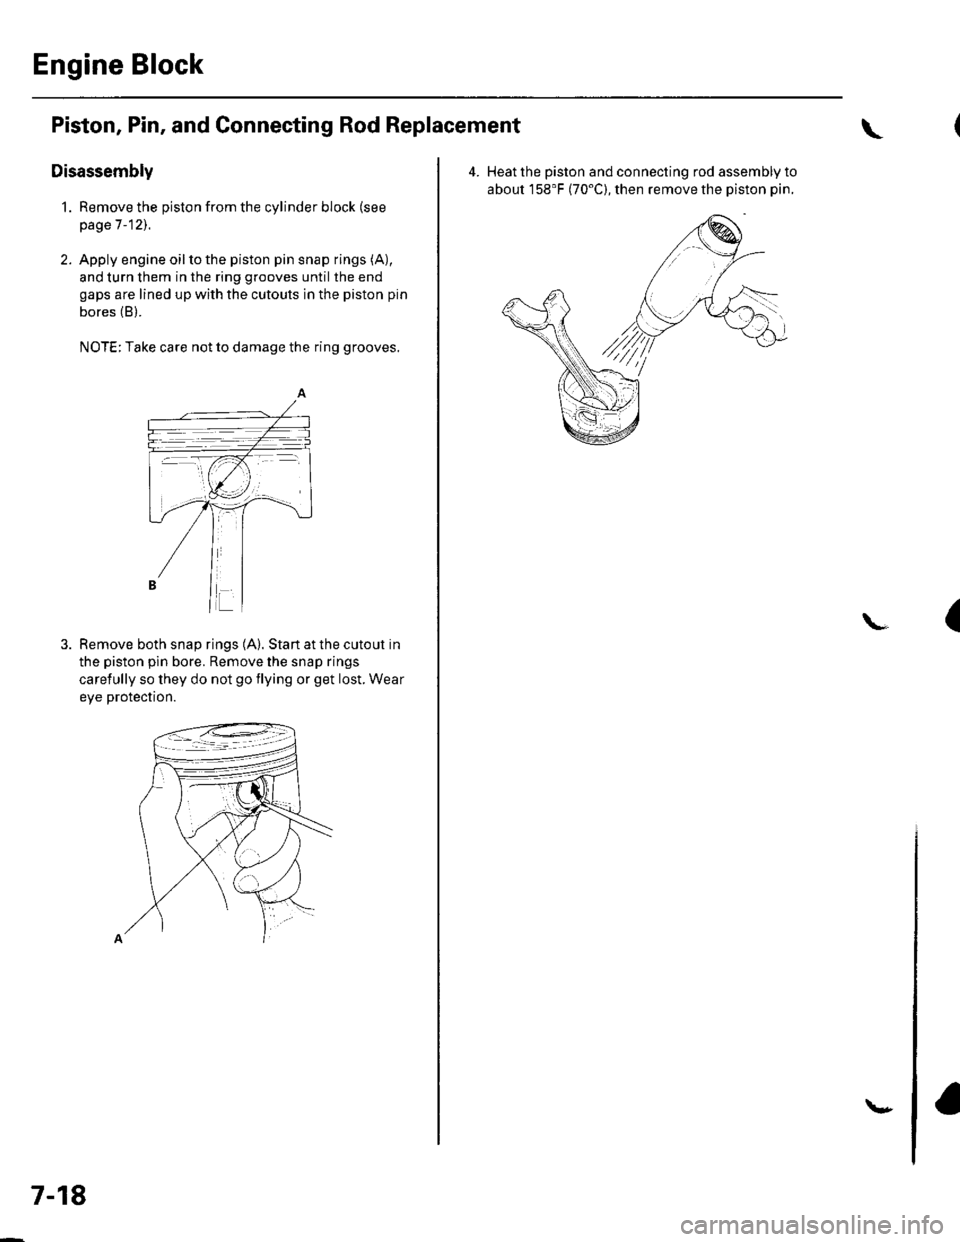 HONDA CIVIC 2003 7.G Service Manual Engine Block
Piston, Pin, and Connecting Rod Replacement
Disassembly
1. Remove the piston from the cylinder block (see
page 7 -12).
2. Apply engine oilto the piston pin snap rings (A),
and turn them i